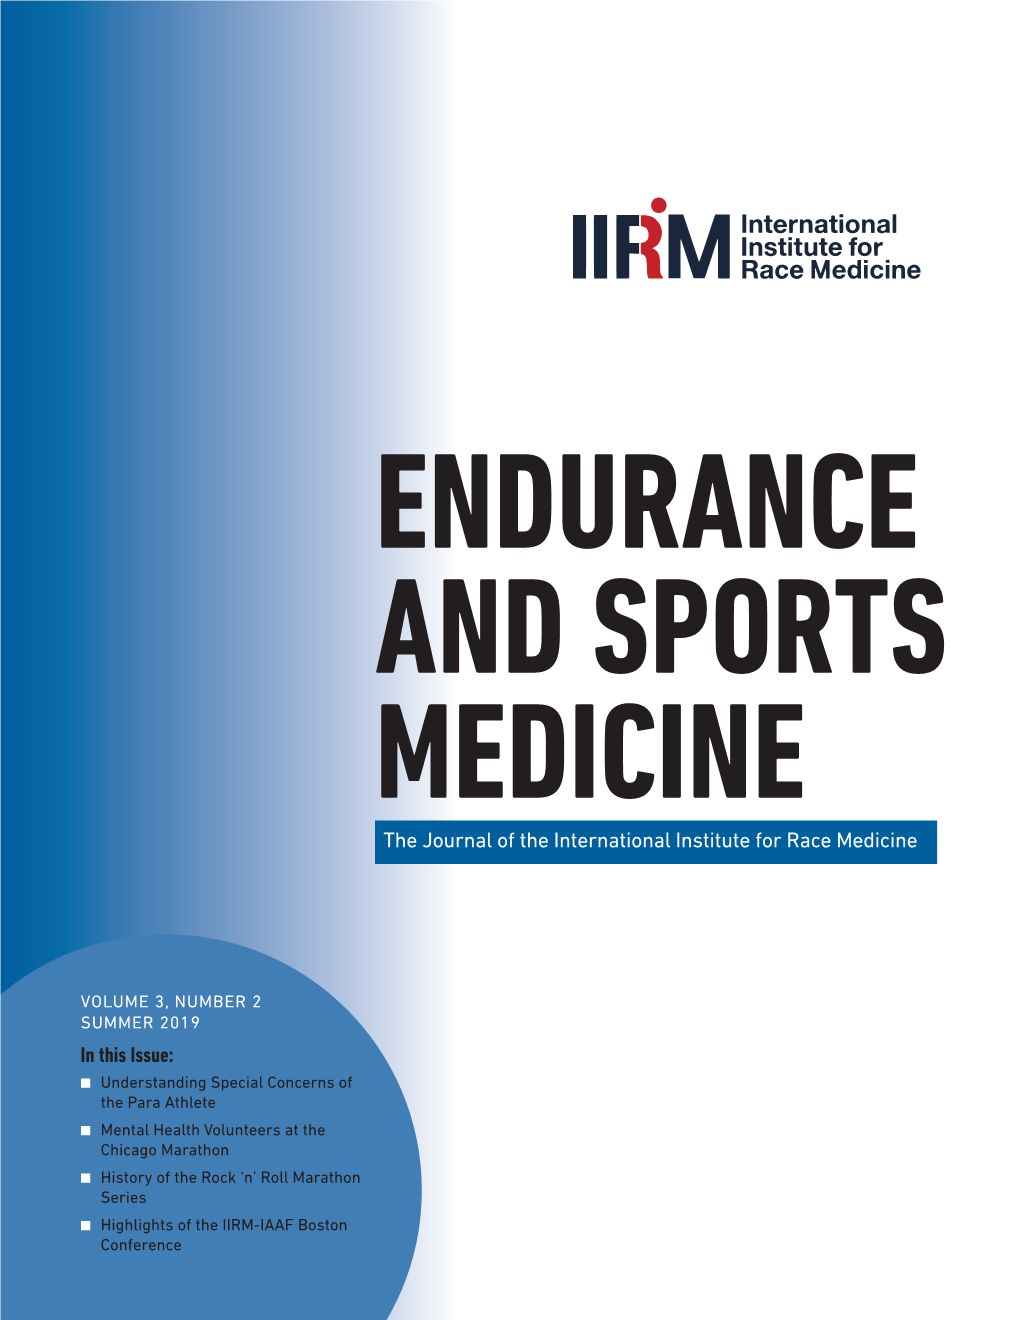 The Journal of the International Institute for Race Medicine in This